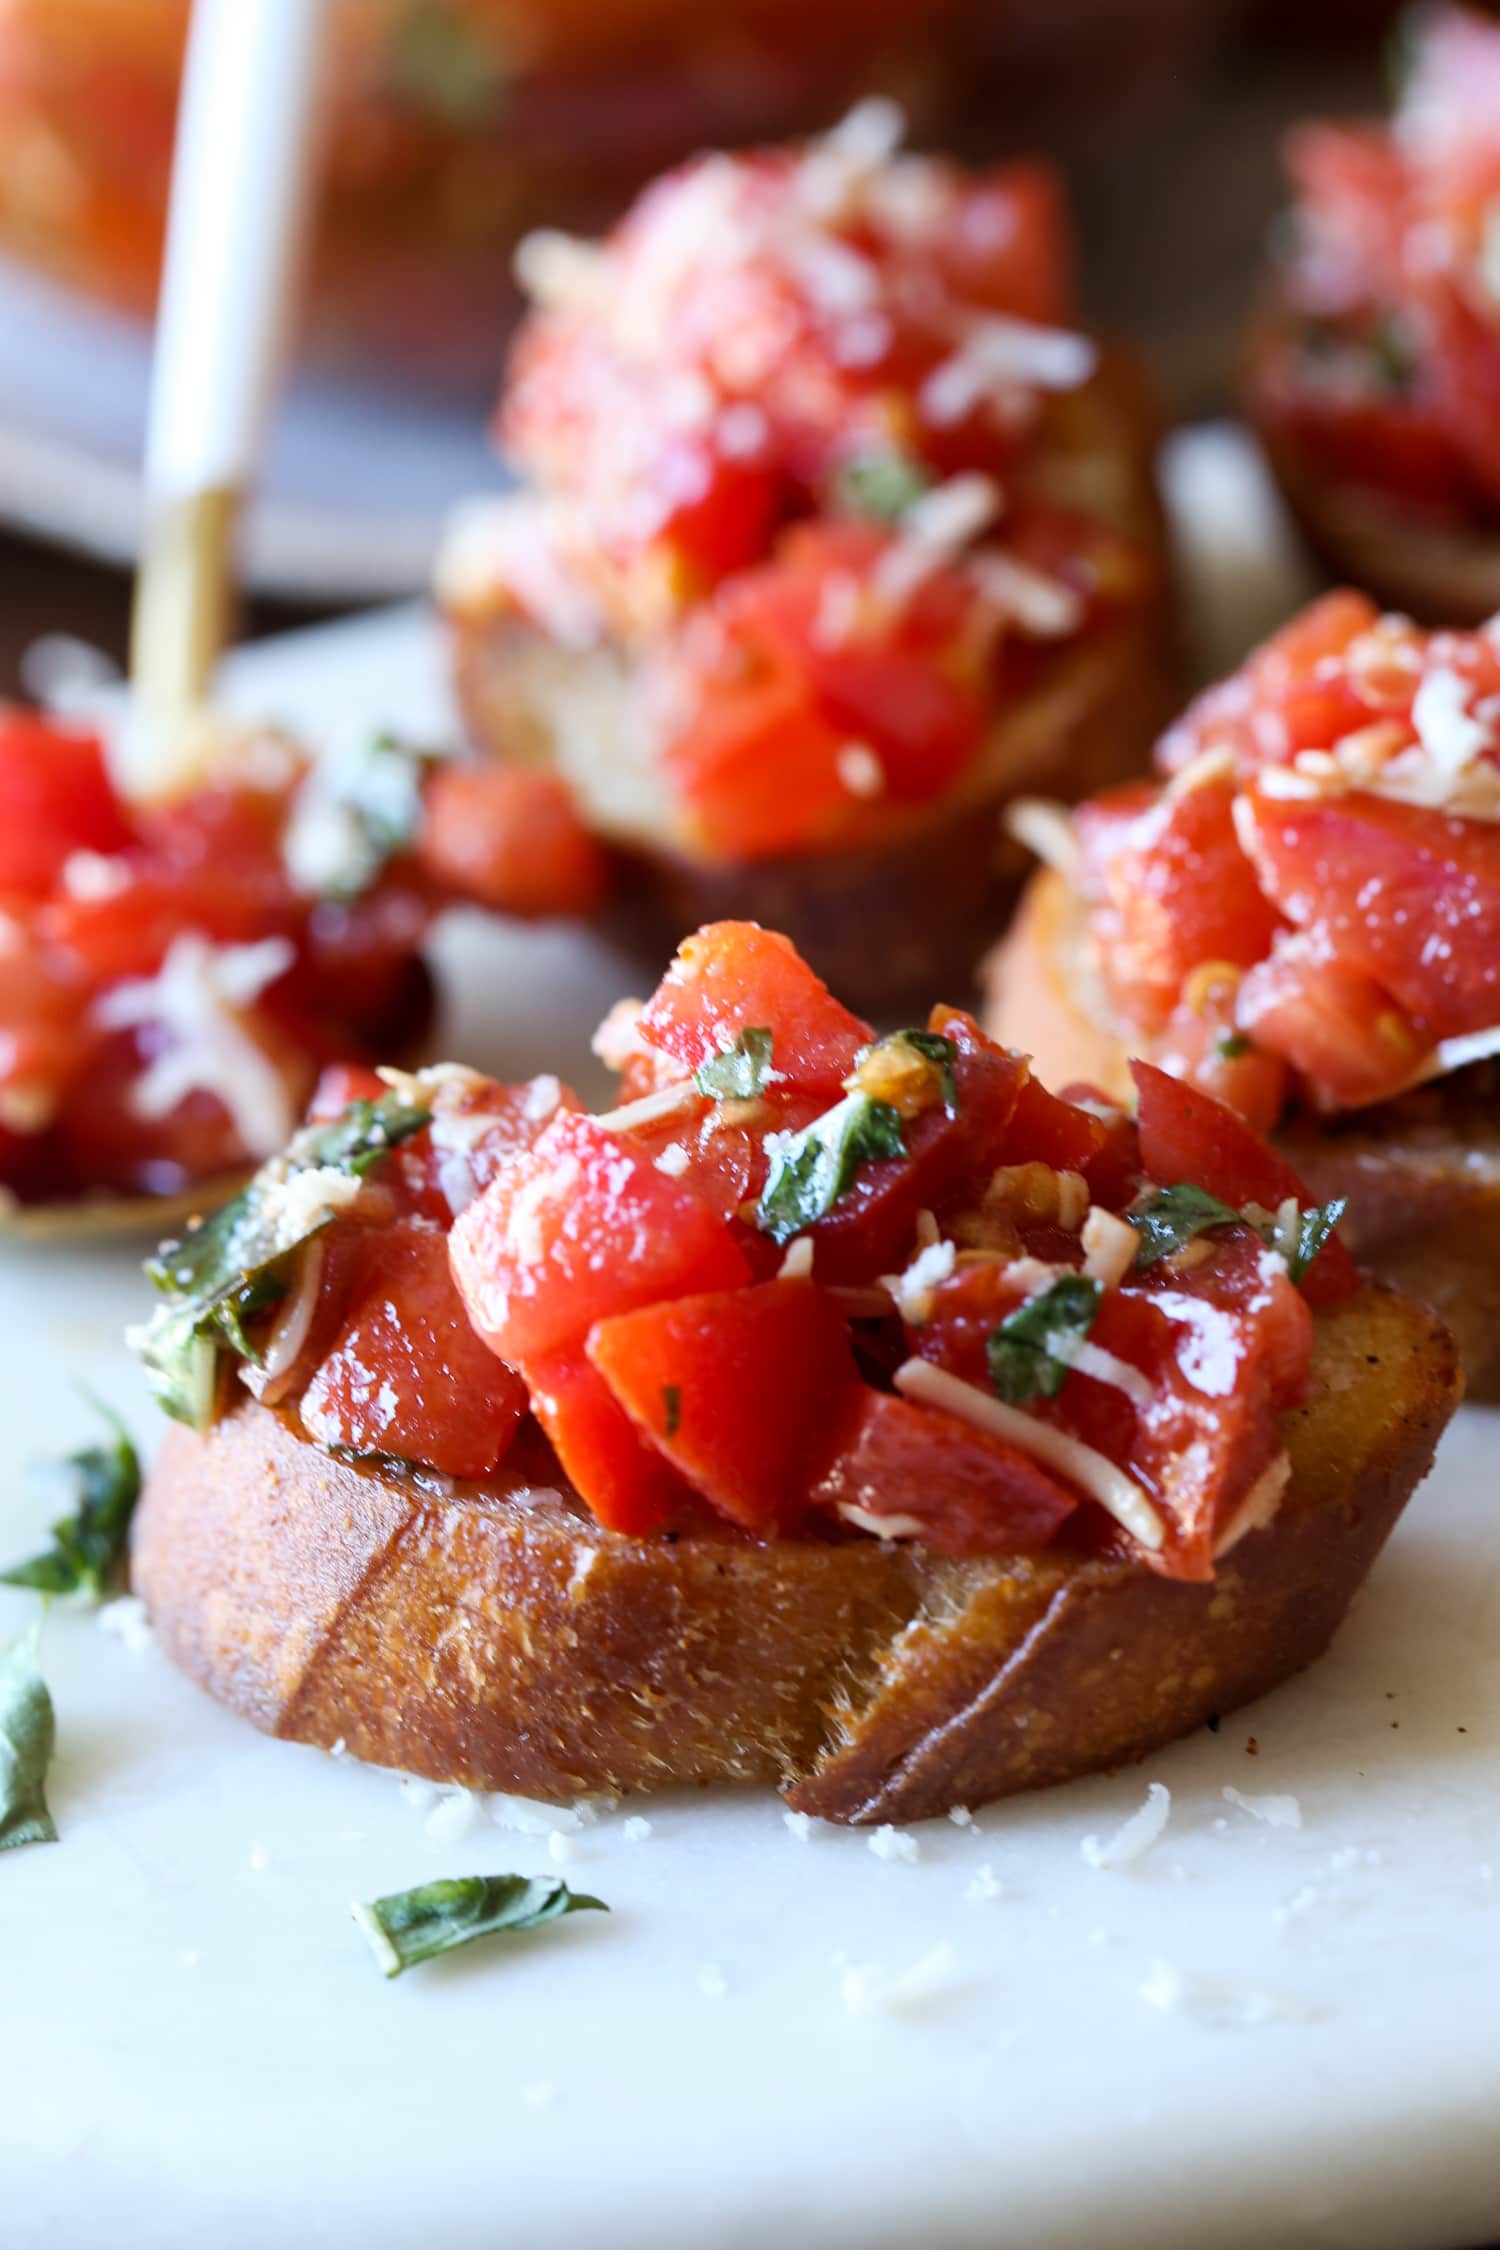 A slice of toasted bread topped with bruschetta.